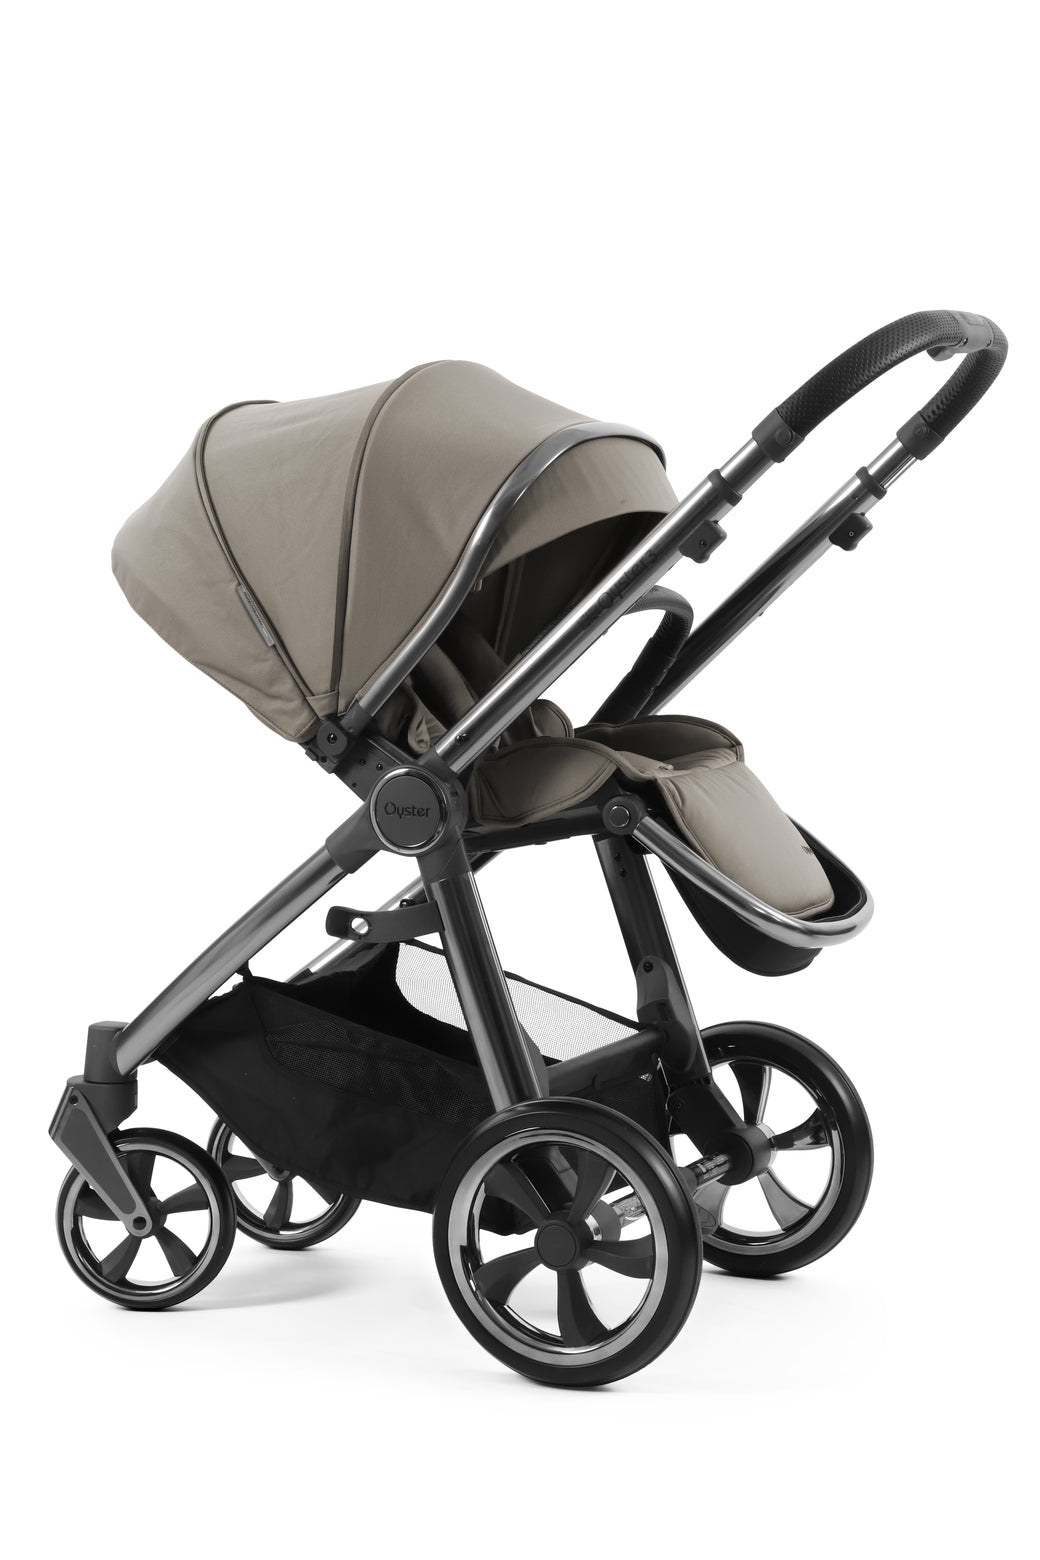 Babystyle Oyster 3 Pushchair + Carrycot - Stone - For Your Little One